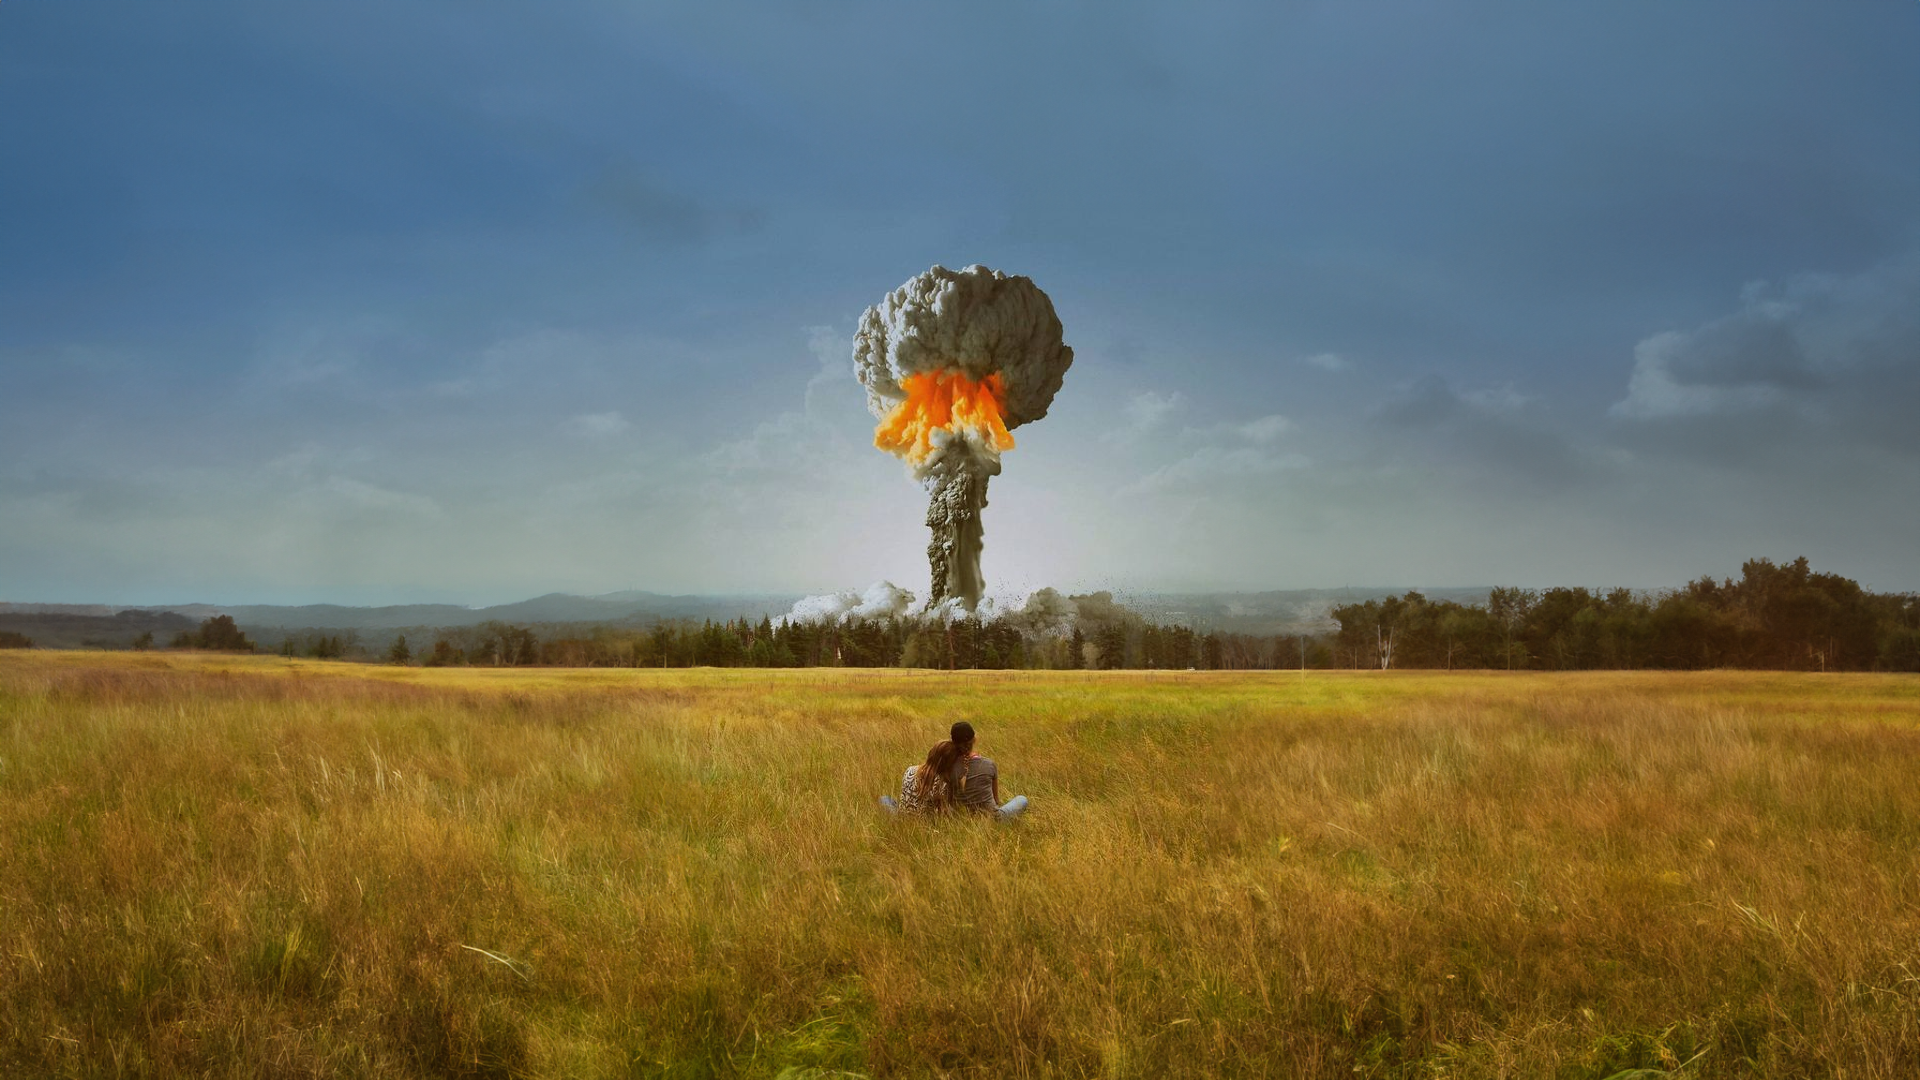 General 1920x1080 nuclear ground explosion couple sky clouds mountains nature atomic bomb